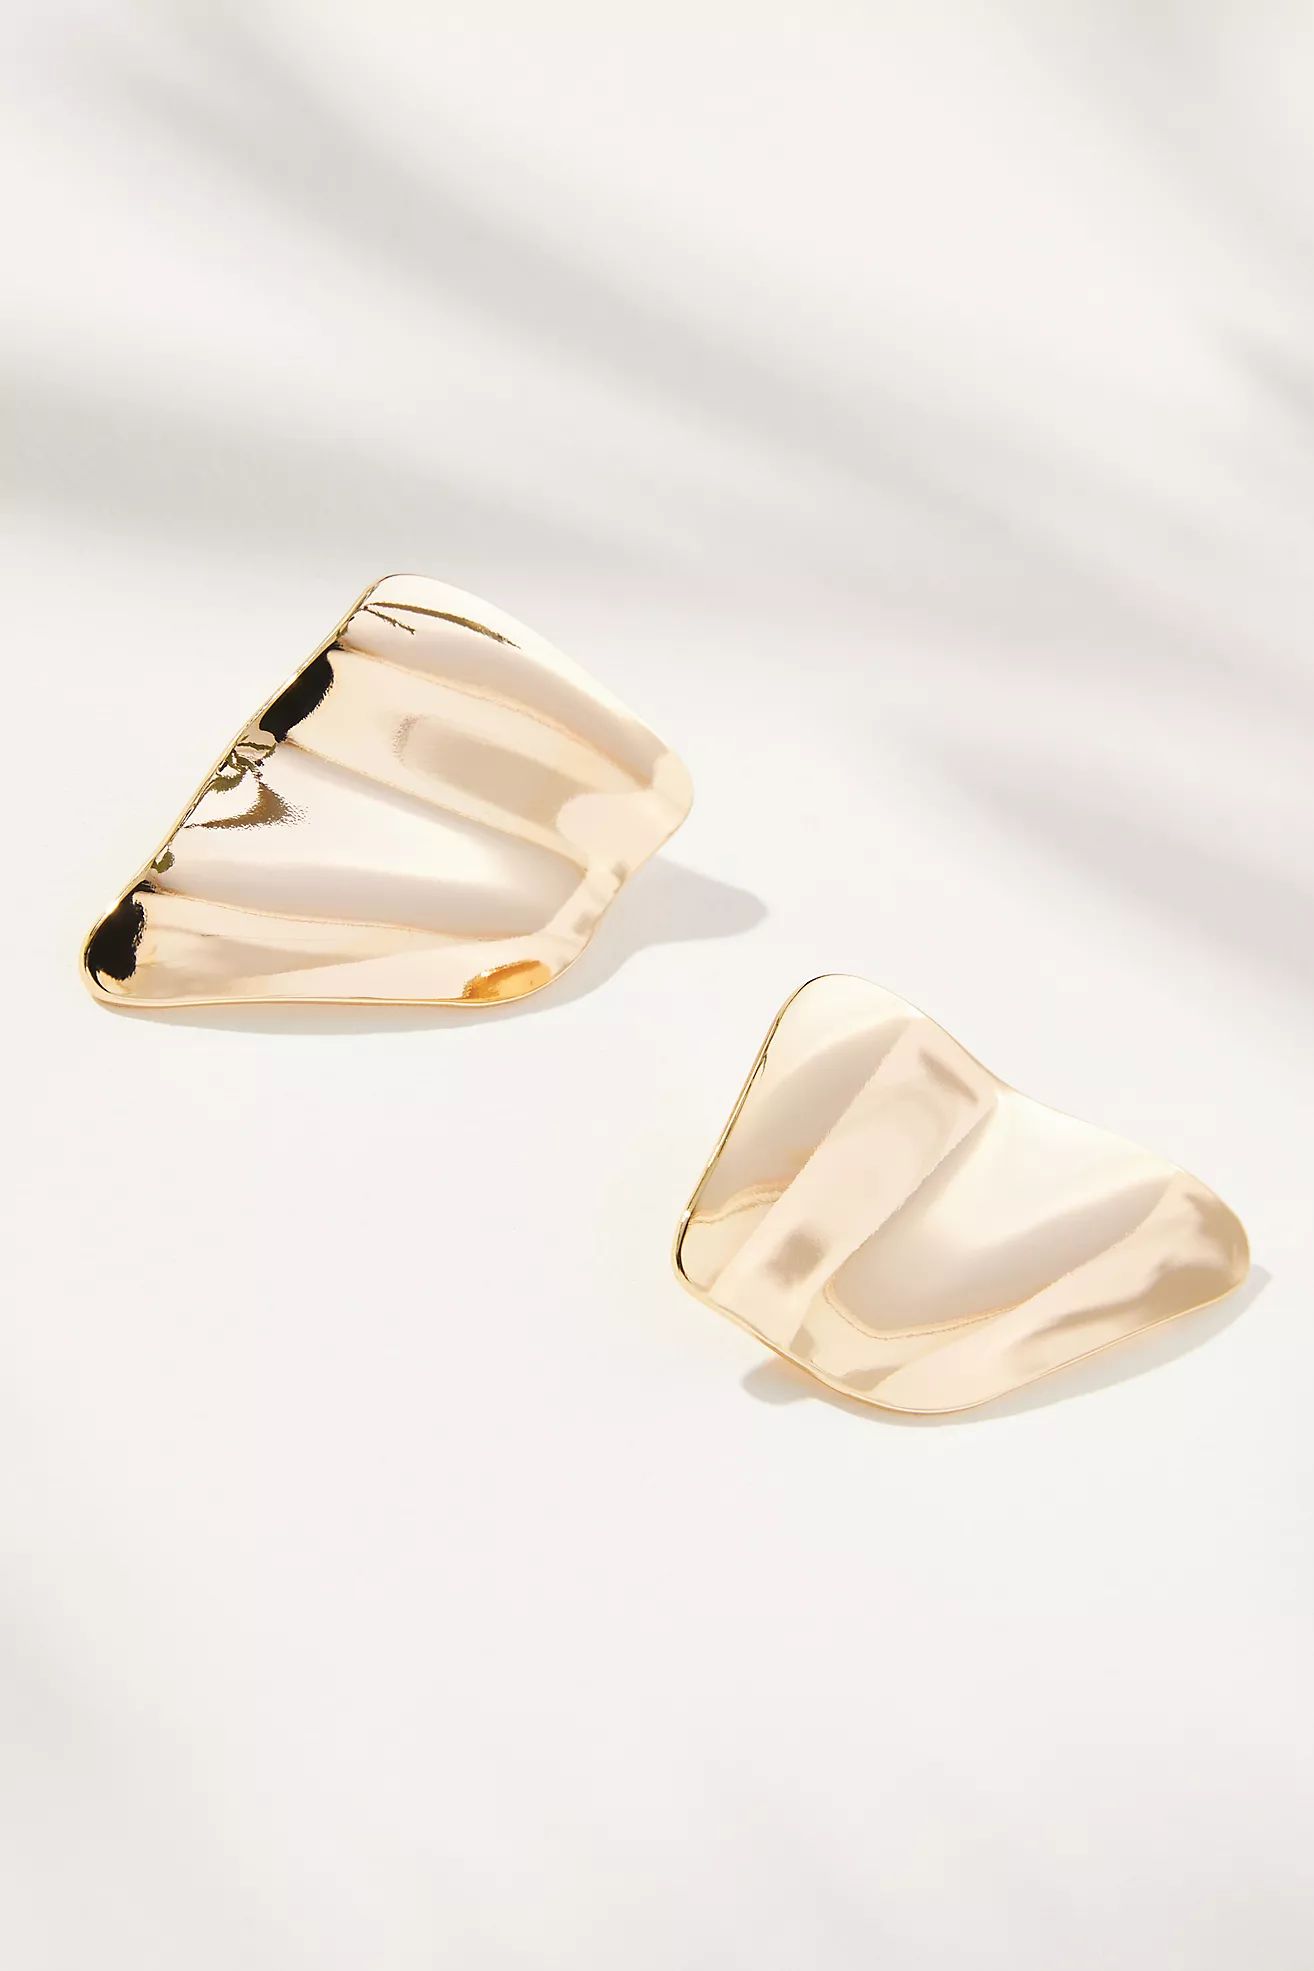 The Restored Vintage Collection: Wing Post Earrings | Anthropologie (US)